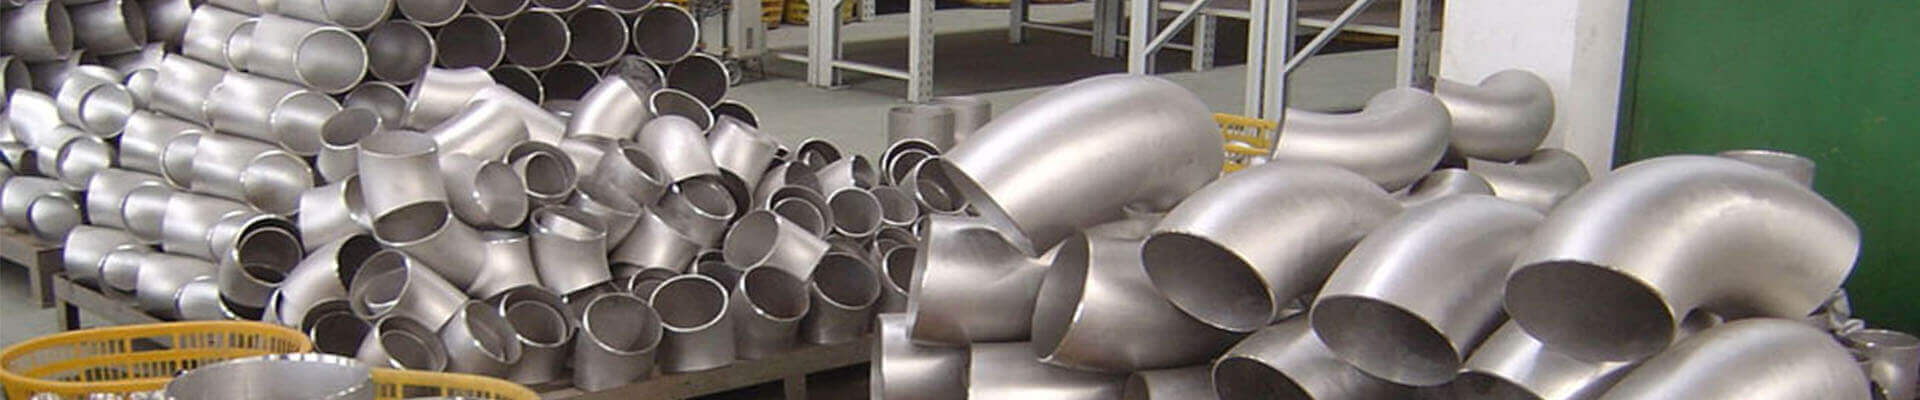 Pipe Fittings banner